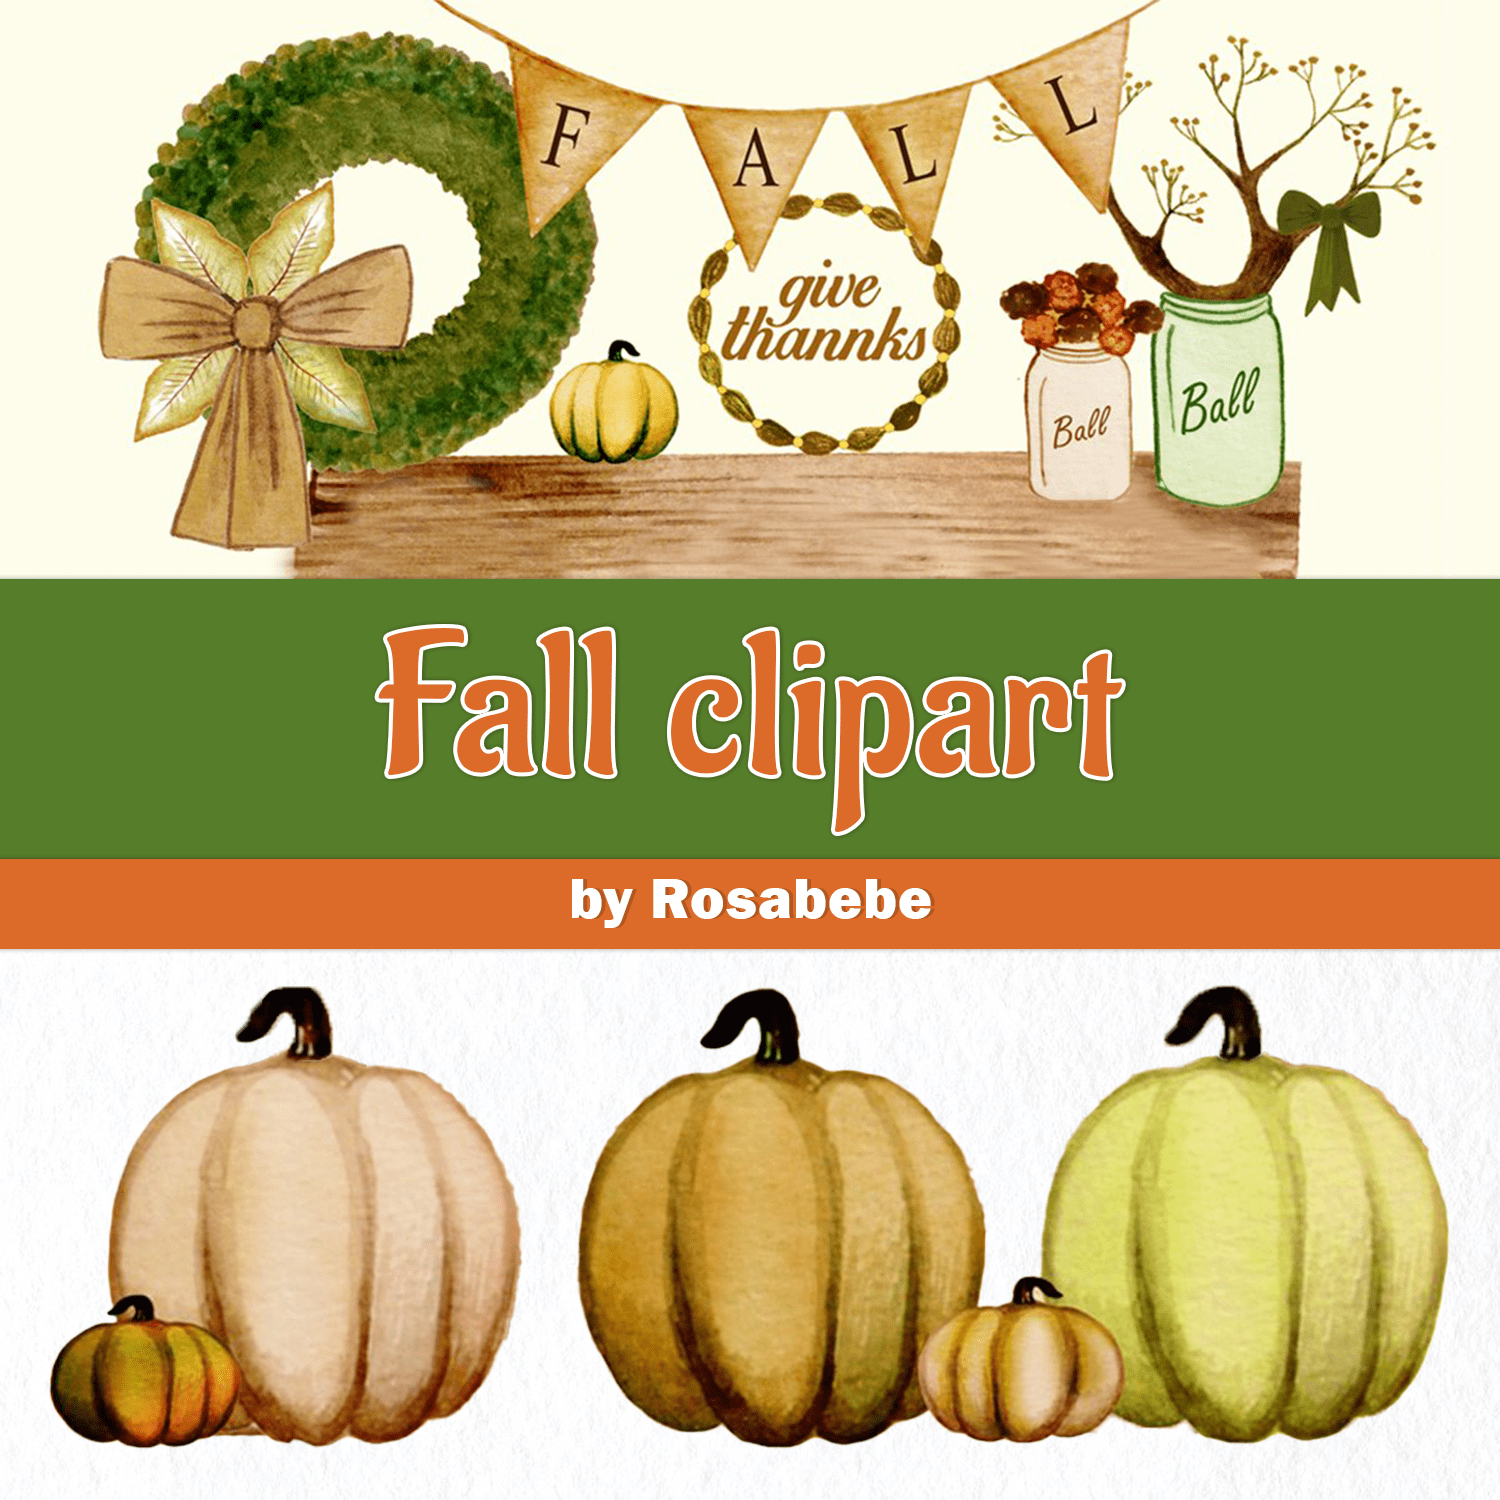 Fall clipart cover.